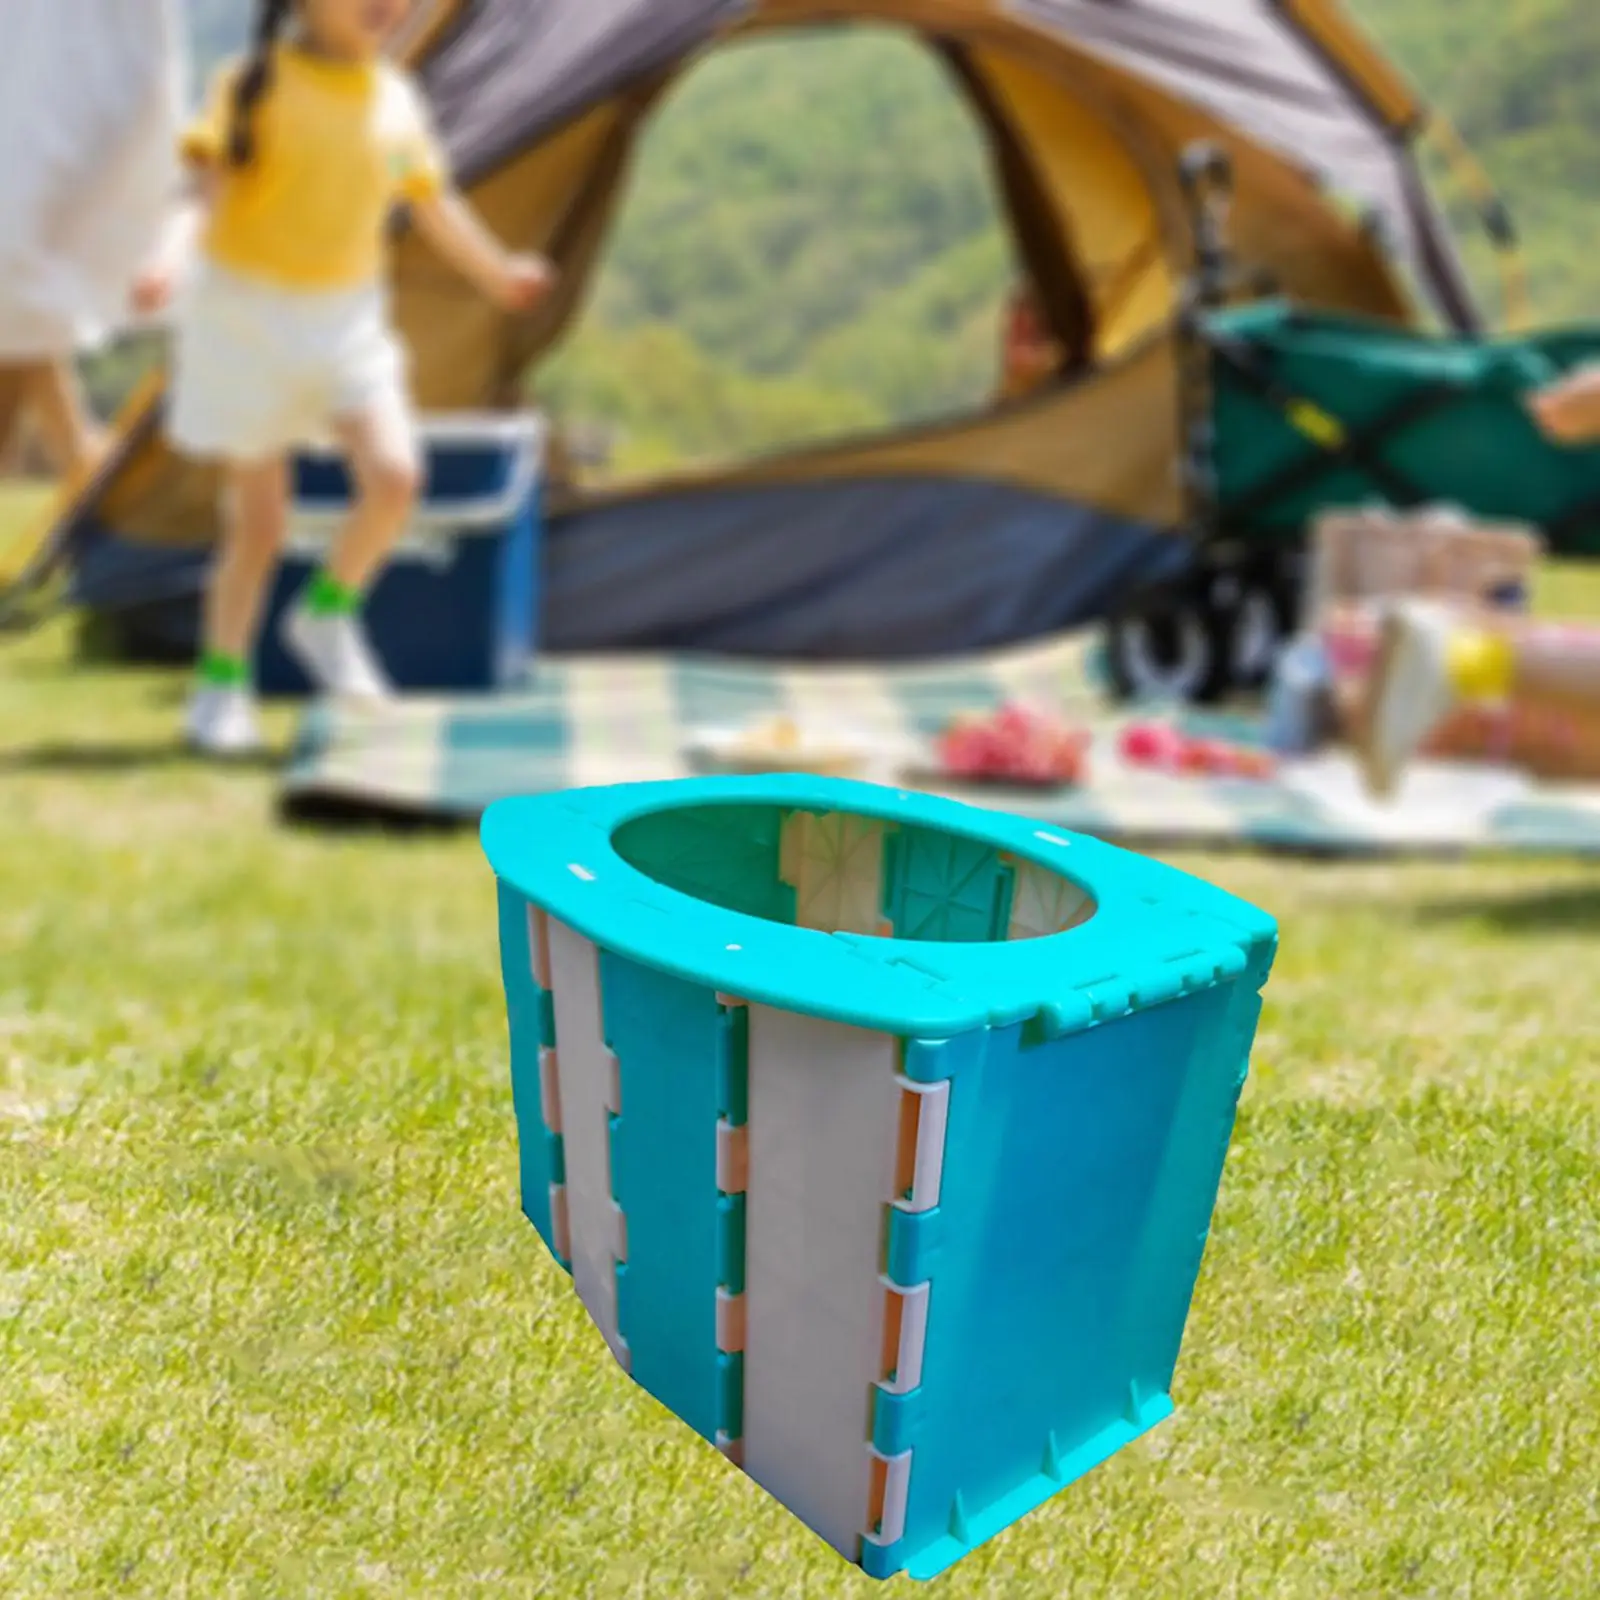 Portable Toilet Folding Camping Toilet Multifunctional Compact Durable Potty for